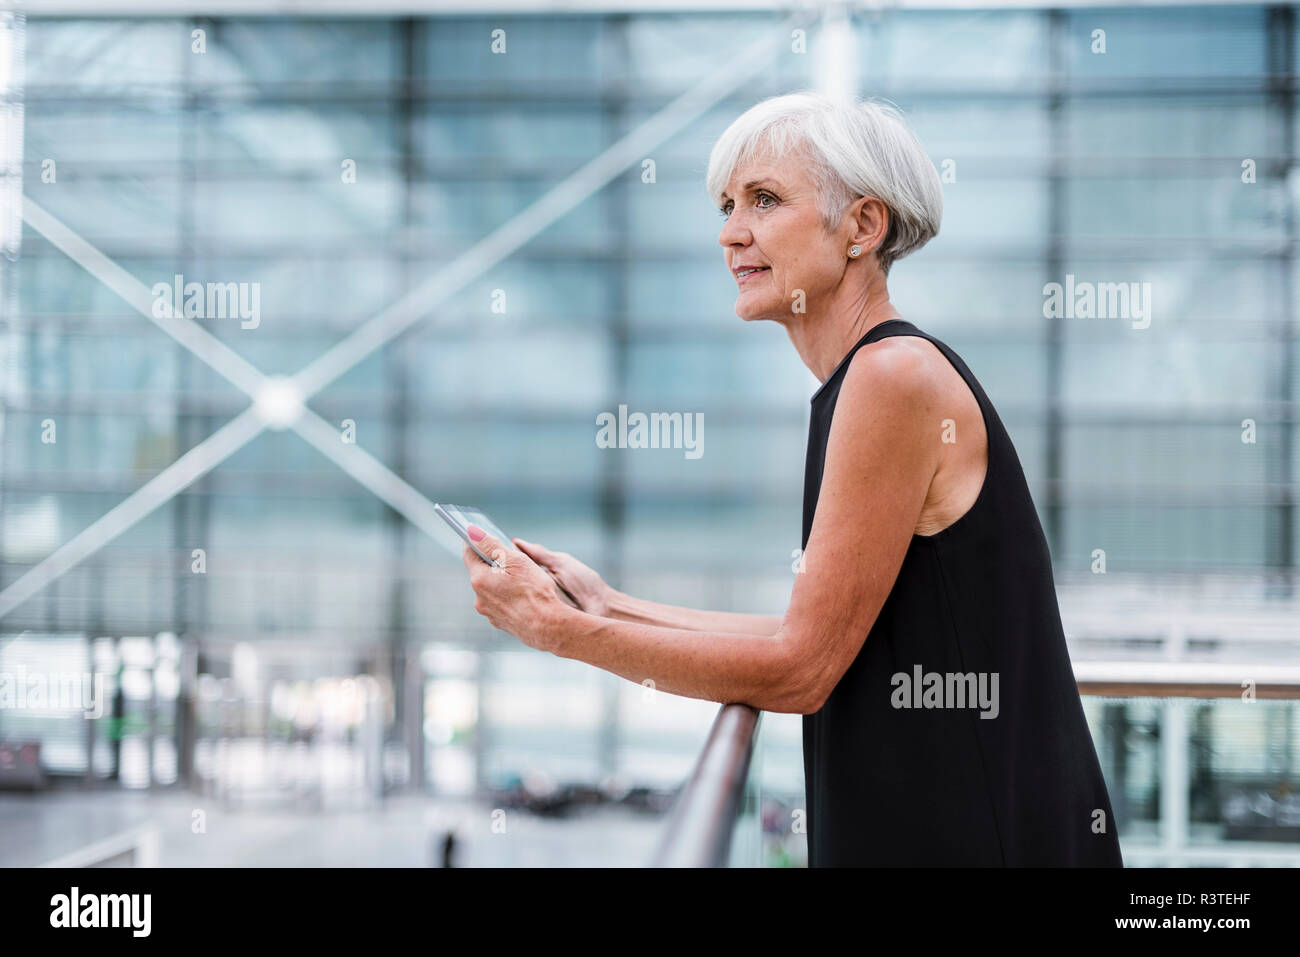 Senior woman with tablet wearing black dress leaning against a railing Stock Photo